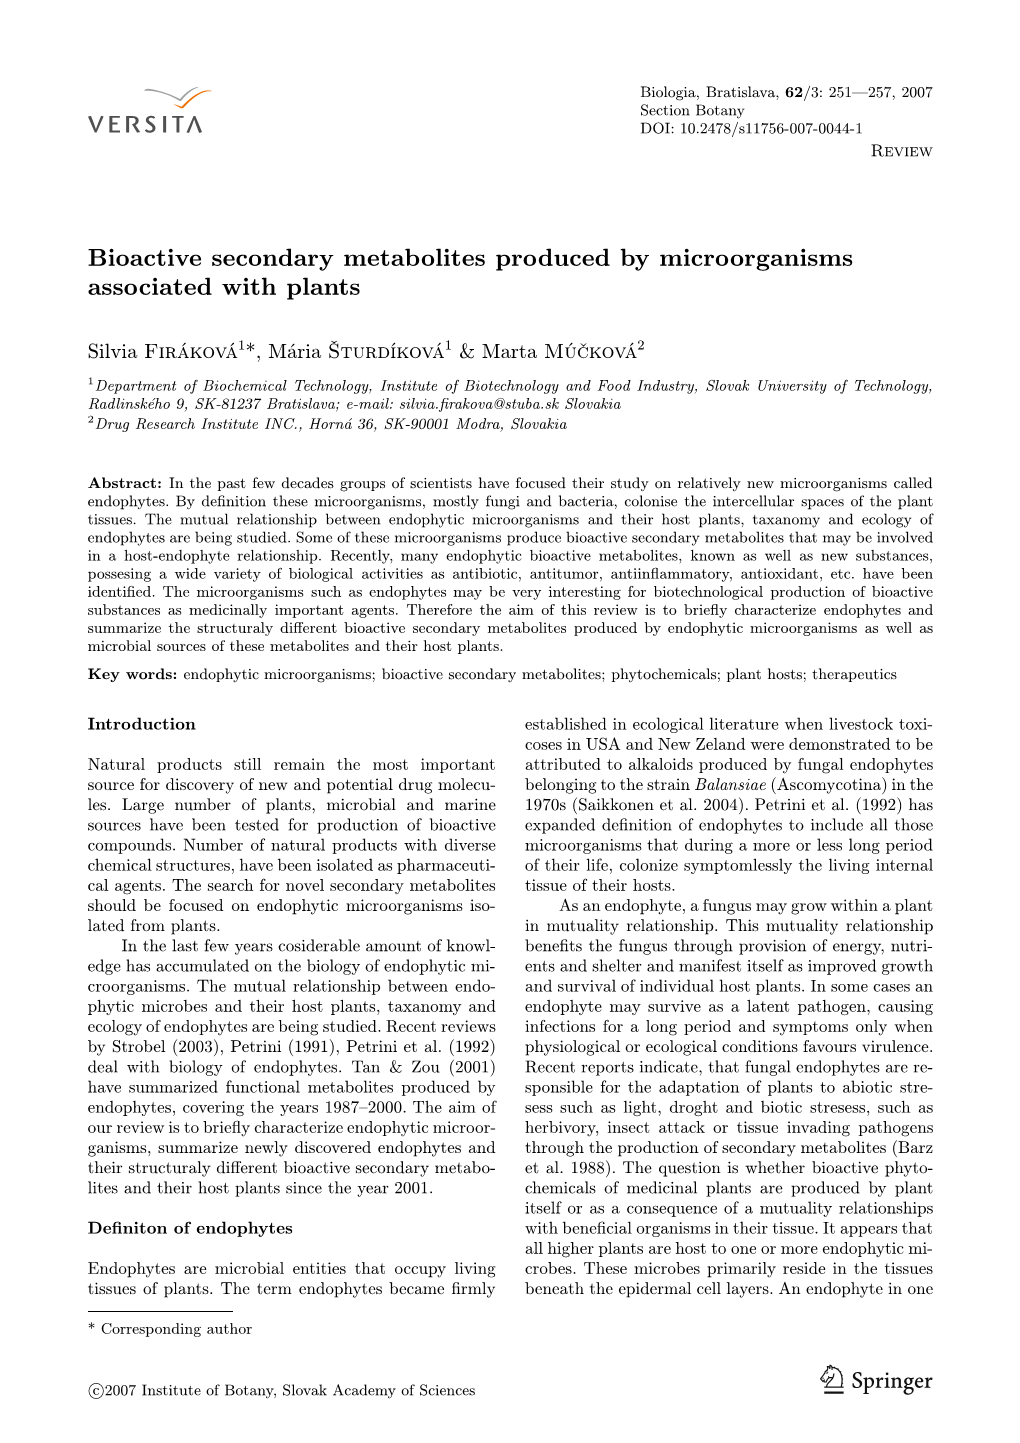 Bioactive Secondary Metabolites Produced by Microorganisms Associated with Plants